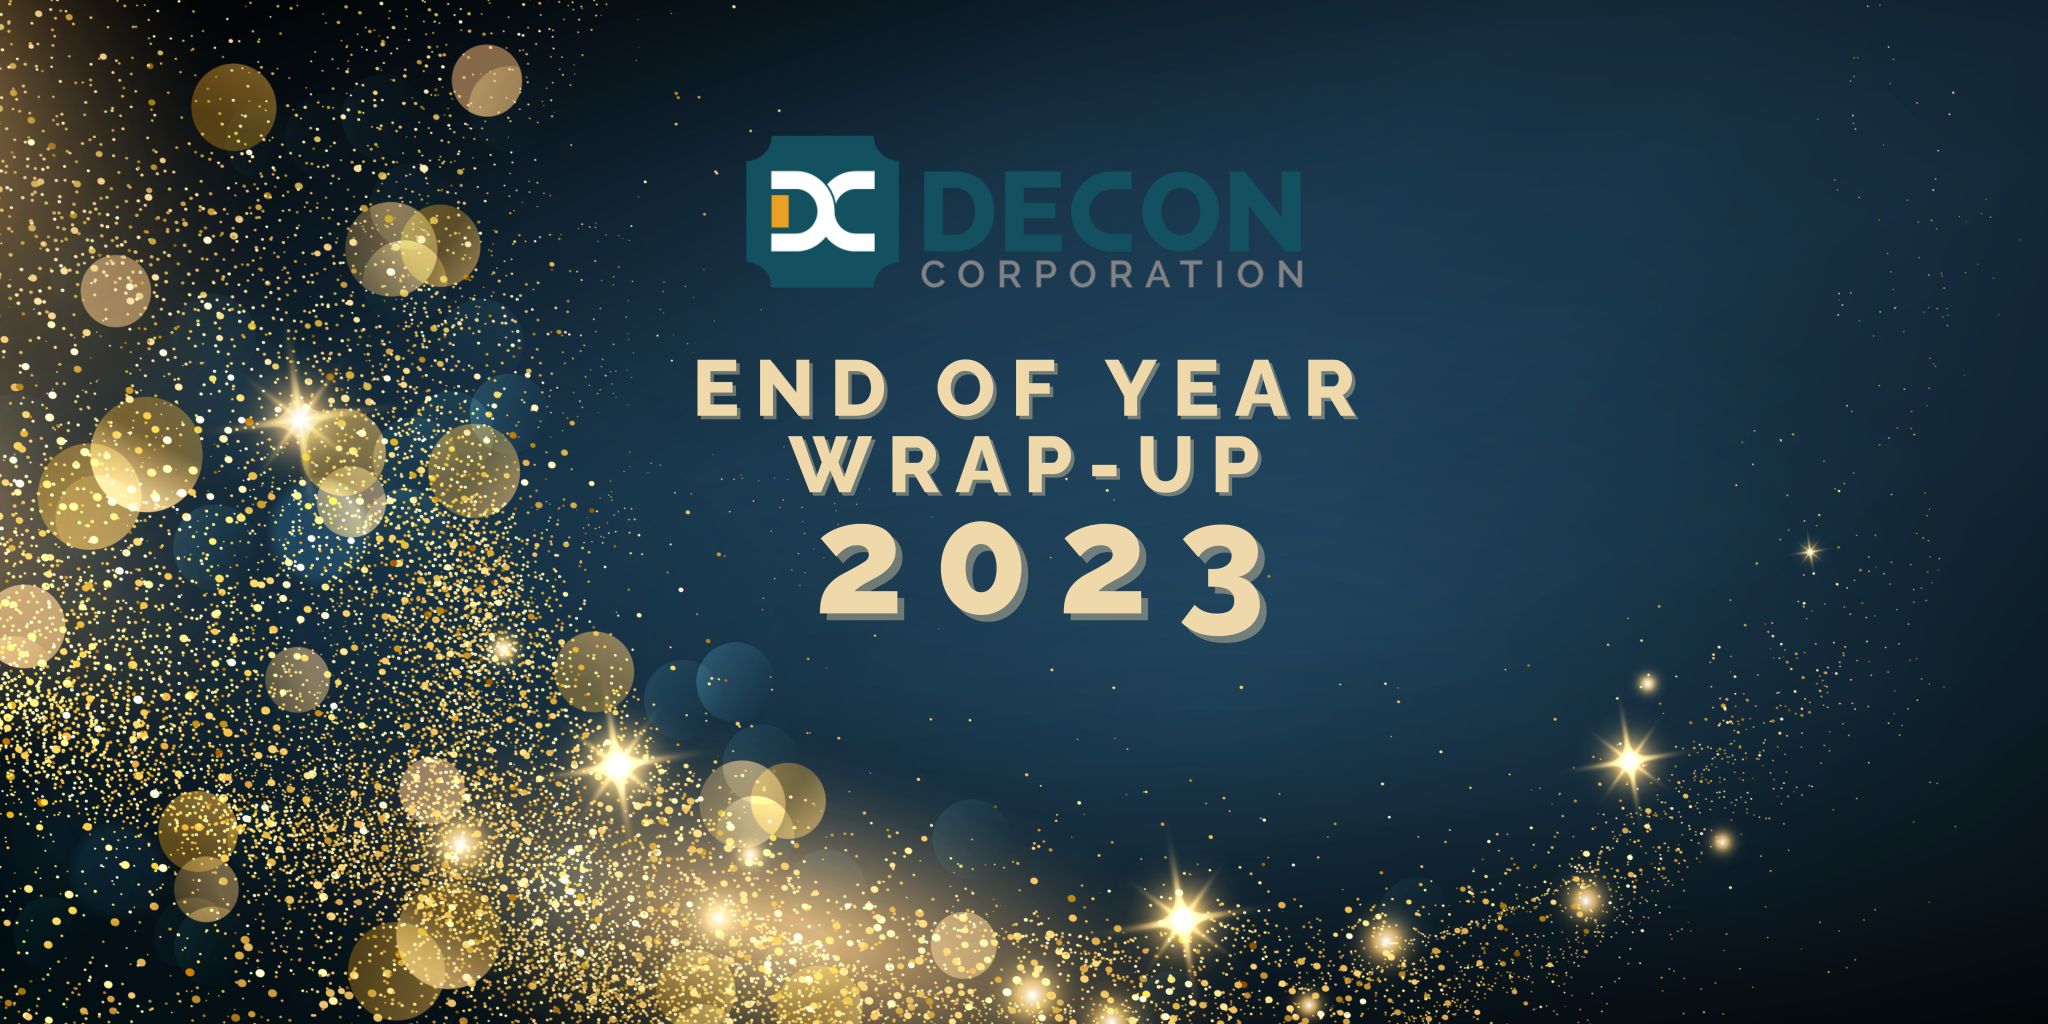 A Big Year 2023 for Decon Corporation